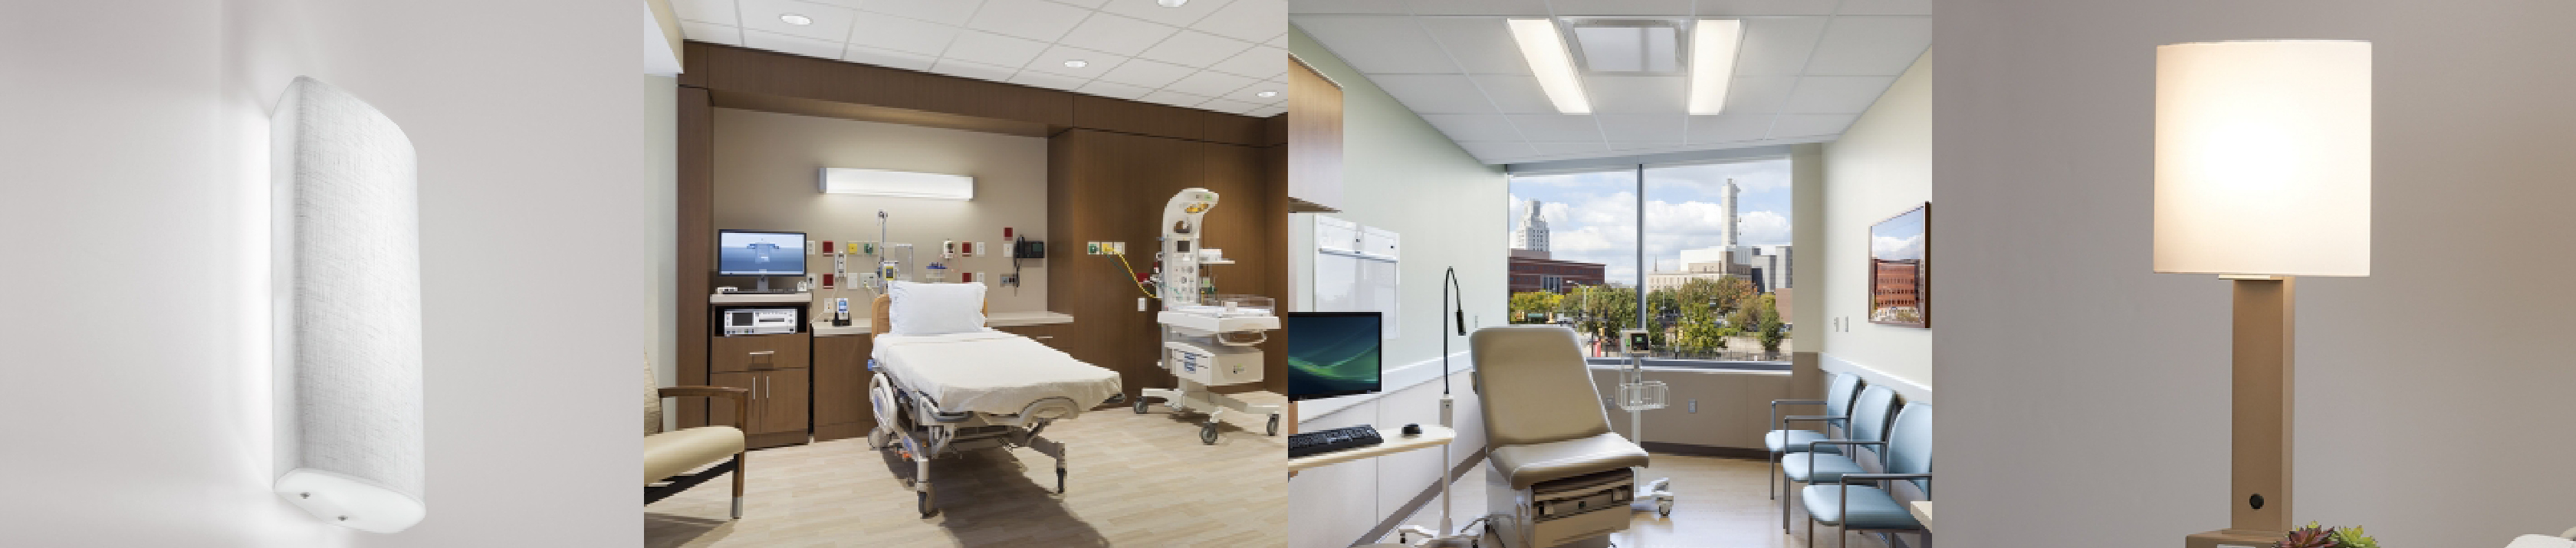 Healthcare patient room lit with sconce, headwall, overbed and table lamp